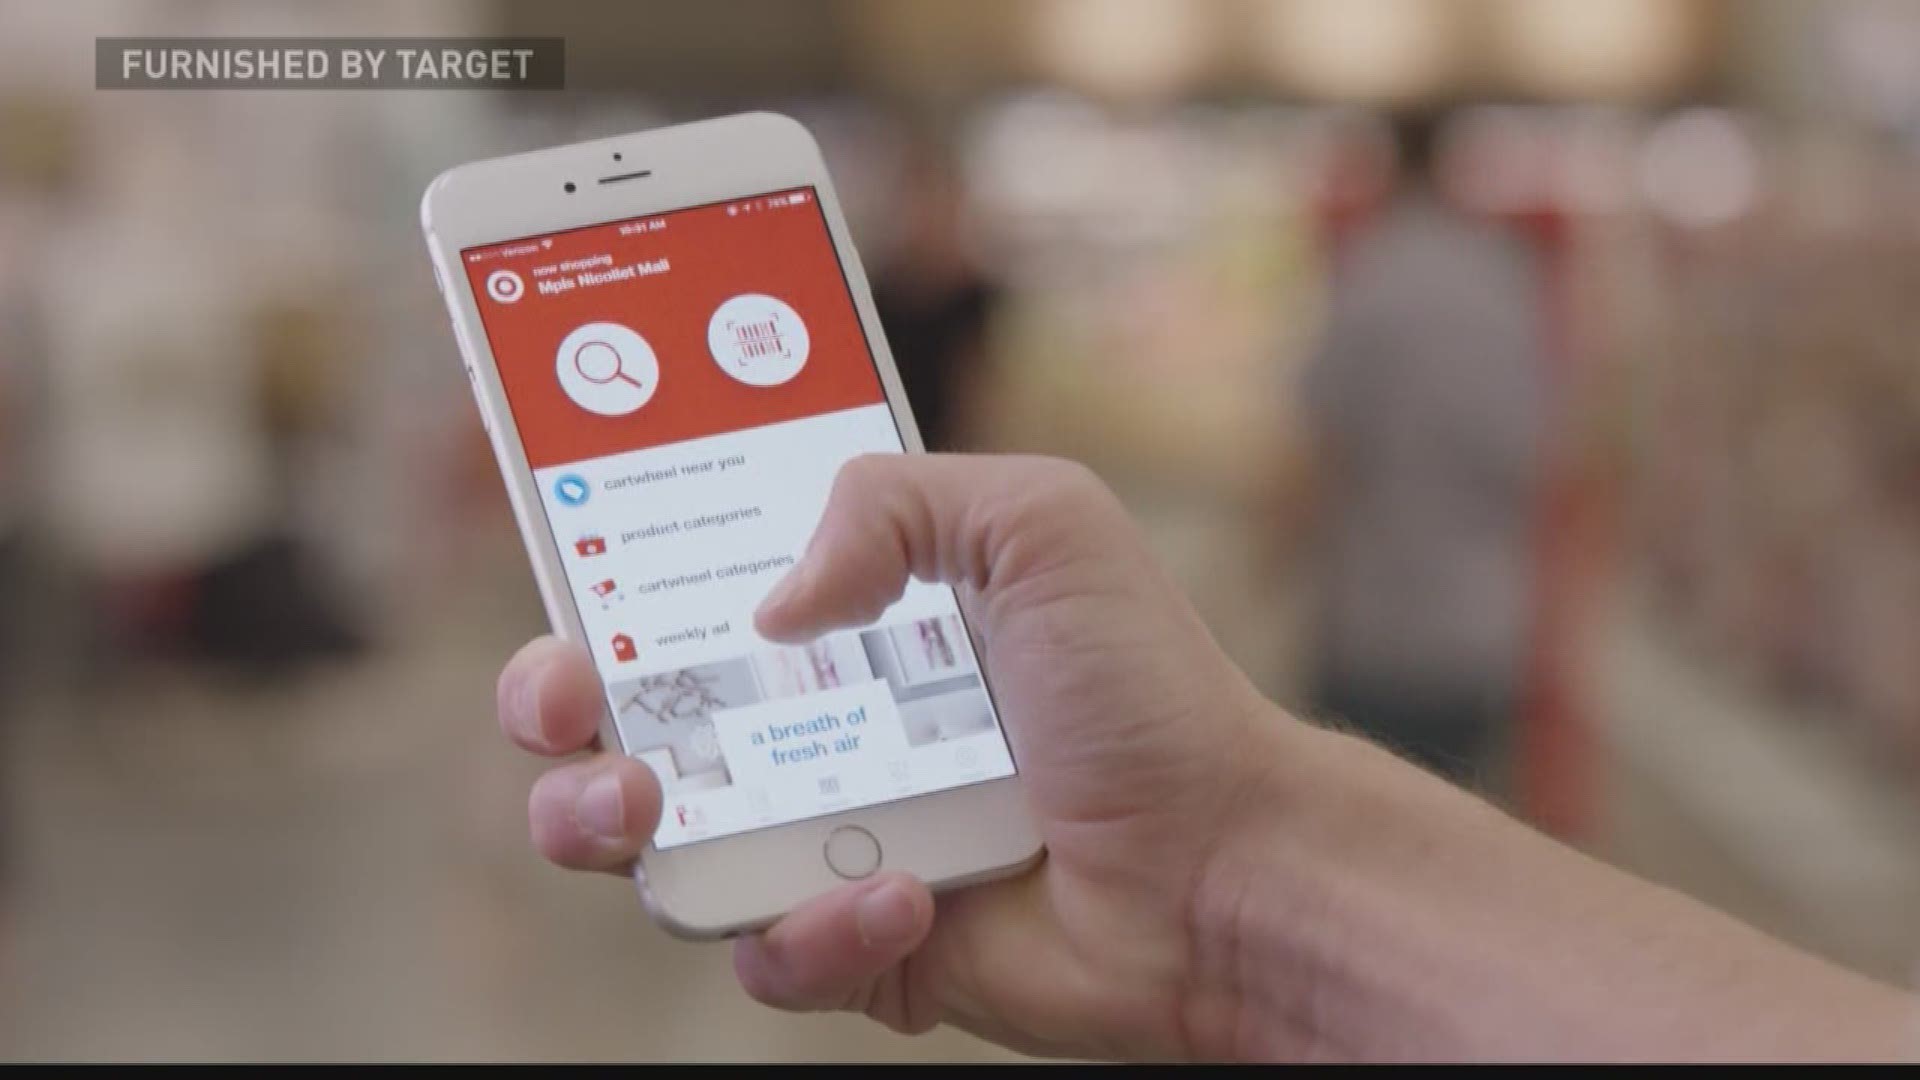 This might be a lifesaver during the holiday season. Target is rolling out new Bluetooth technology on its app that's like GPS for your shopping cart that will show where you are in the store on the app's map. News.